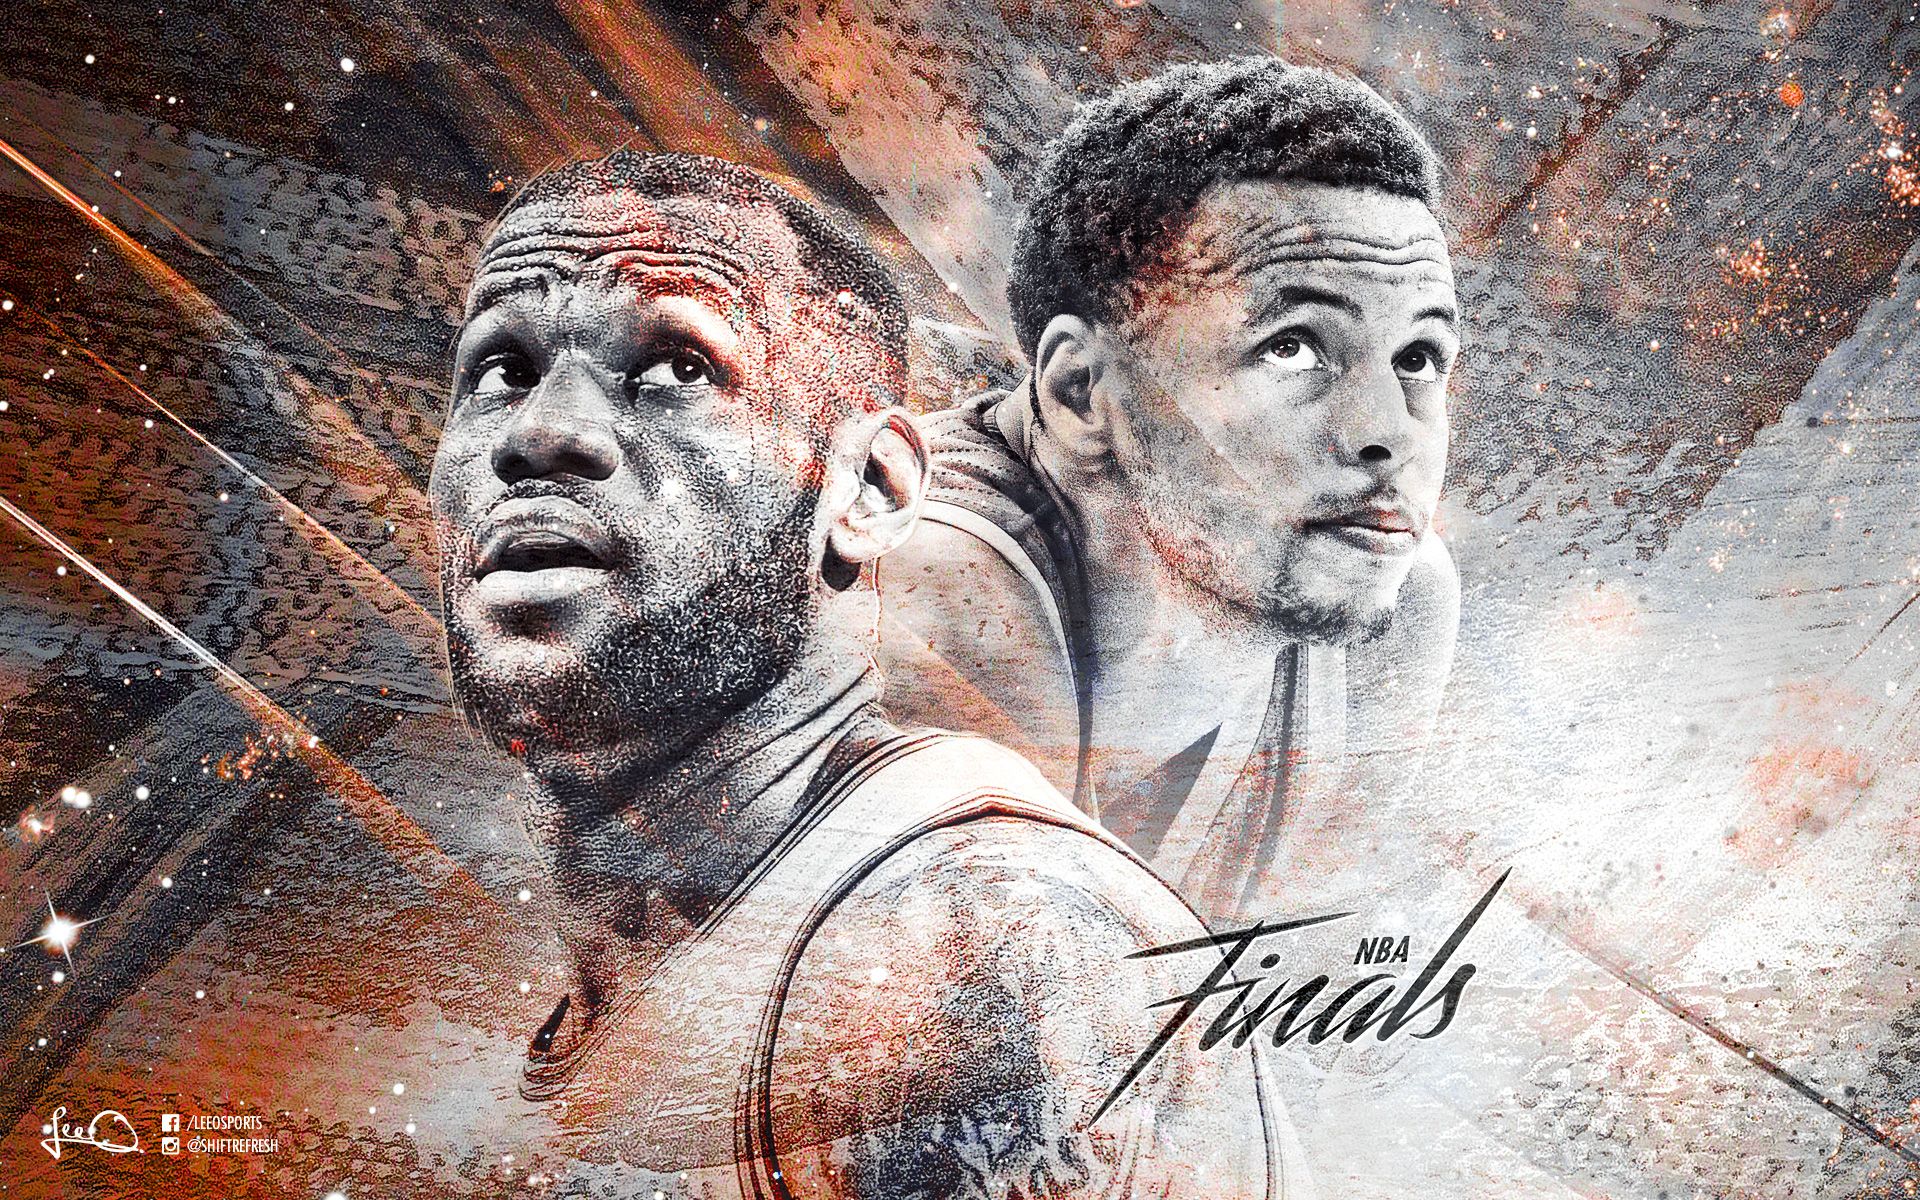 Free download 2015 NBA Finals LeBron vs Curry Basketball